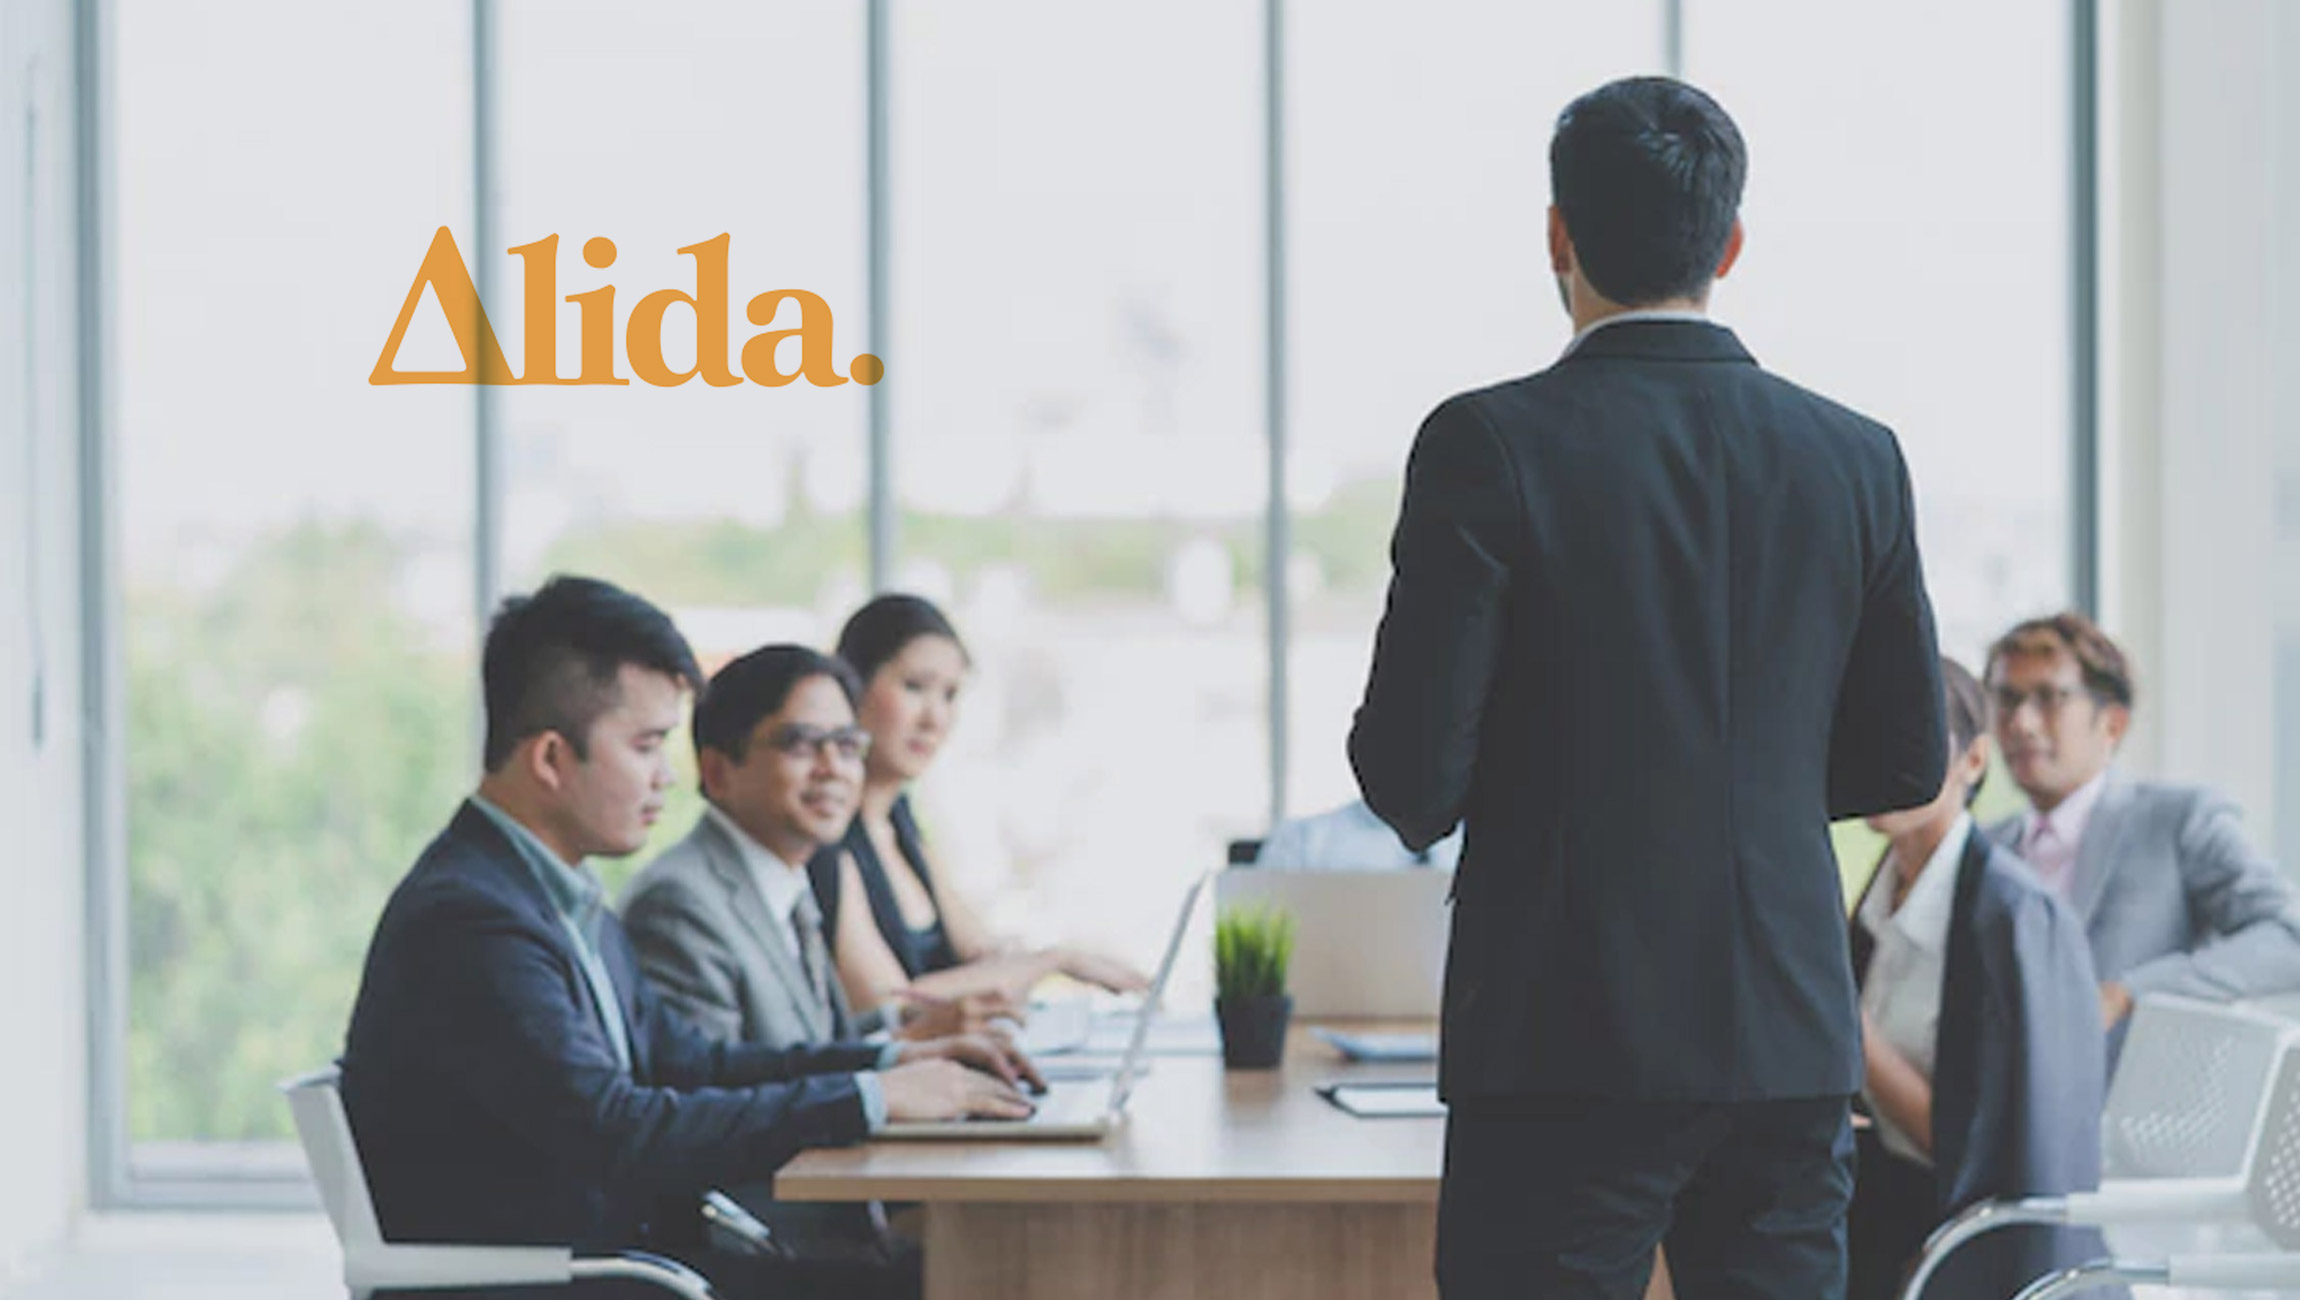 Alida Optimizes TXM Platform to Strengthen Personal Connections Between Organizations and Customers